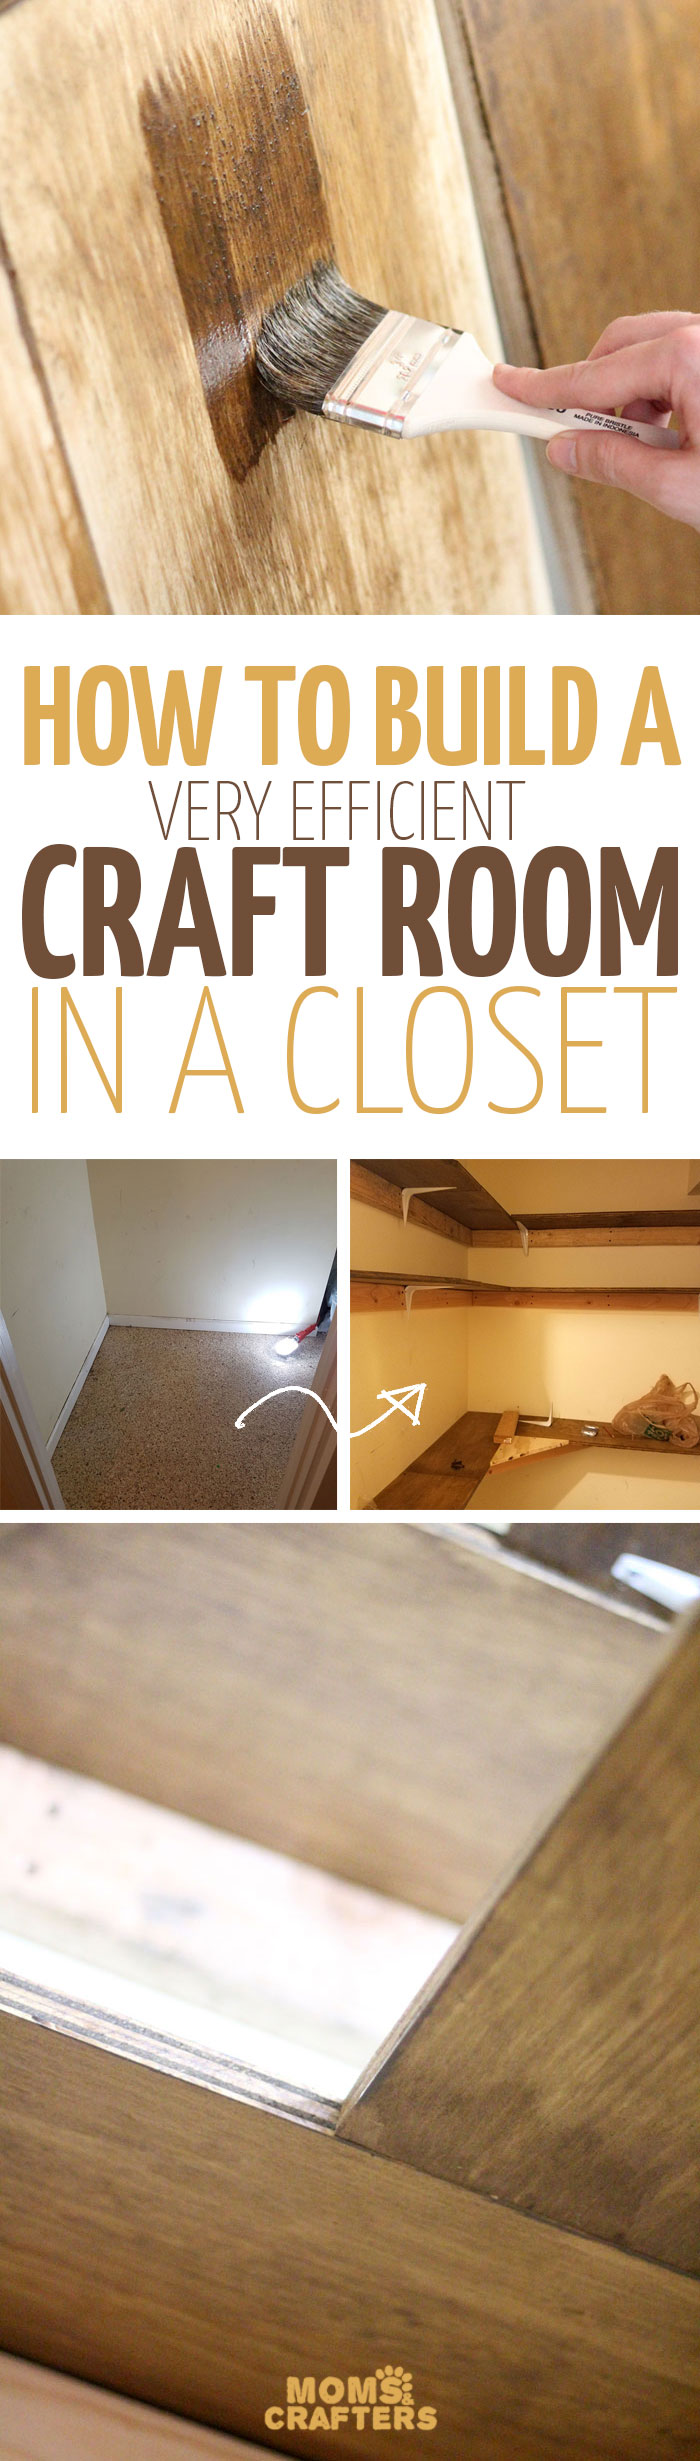 Have you ever considered builting a craft room in a closet? It's not as hard as you think! With the right plan, you can make a very functional craft area in a tiny space. It's a DIY home project you don't want to miss!